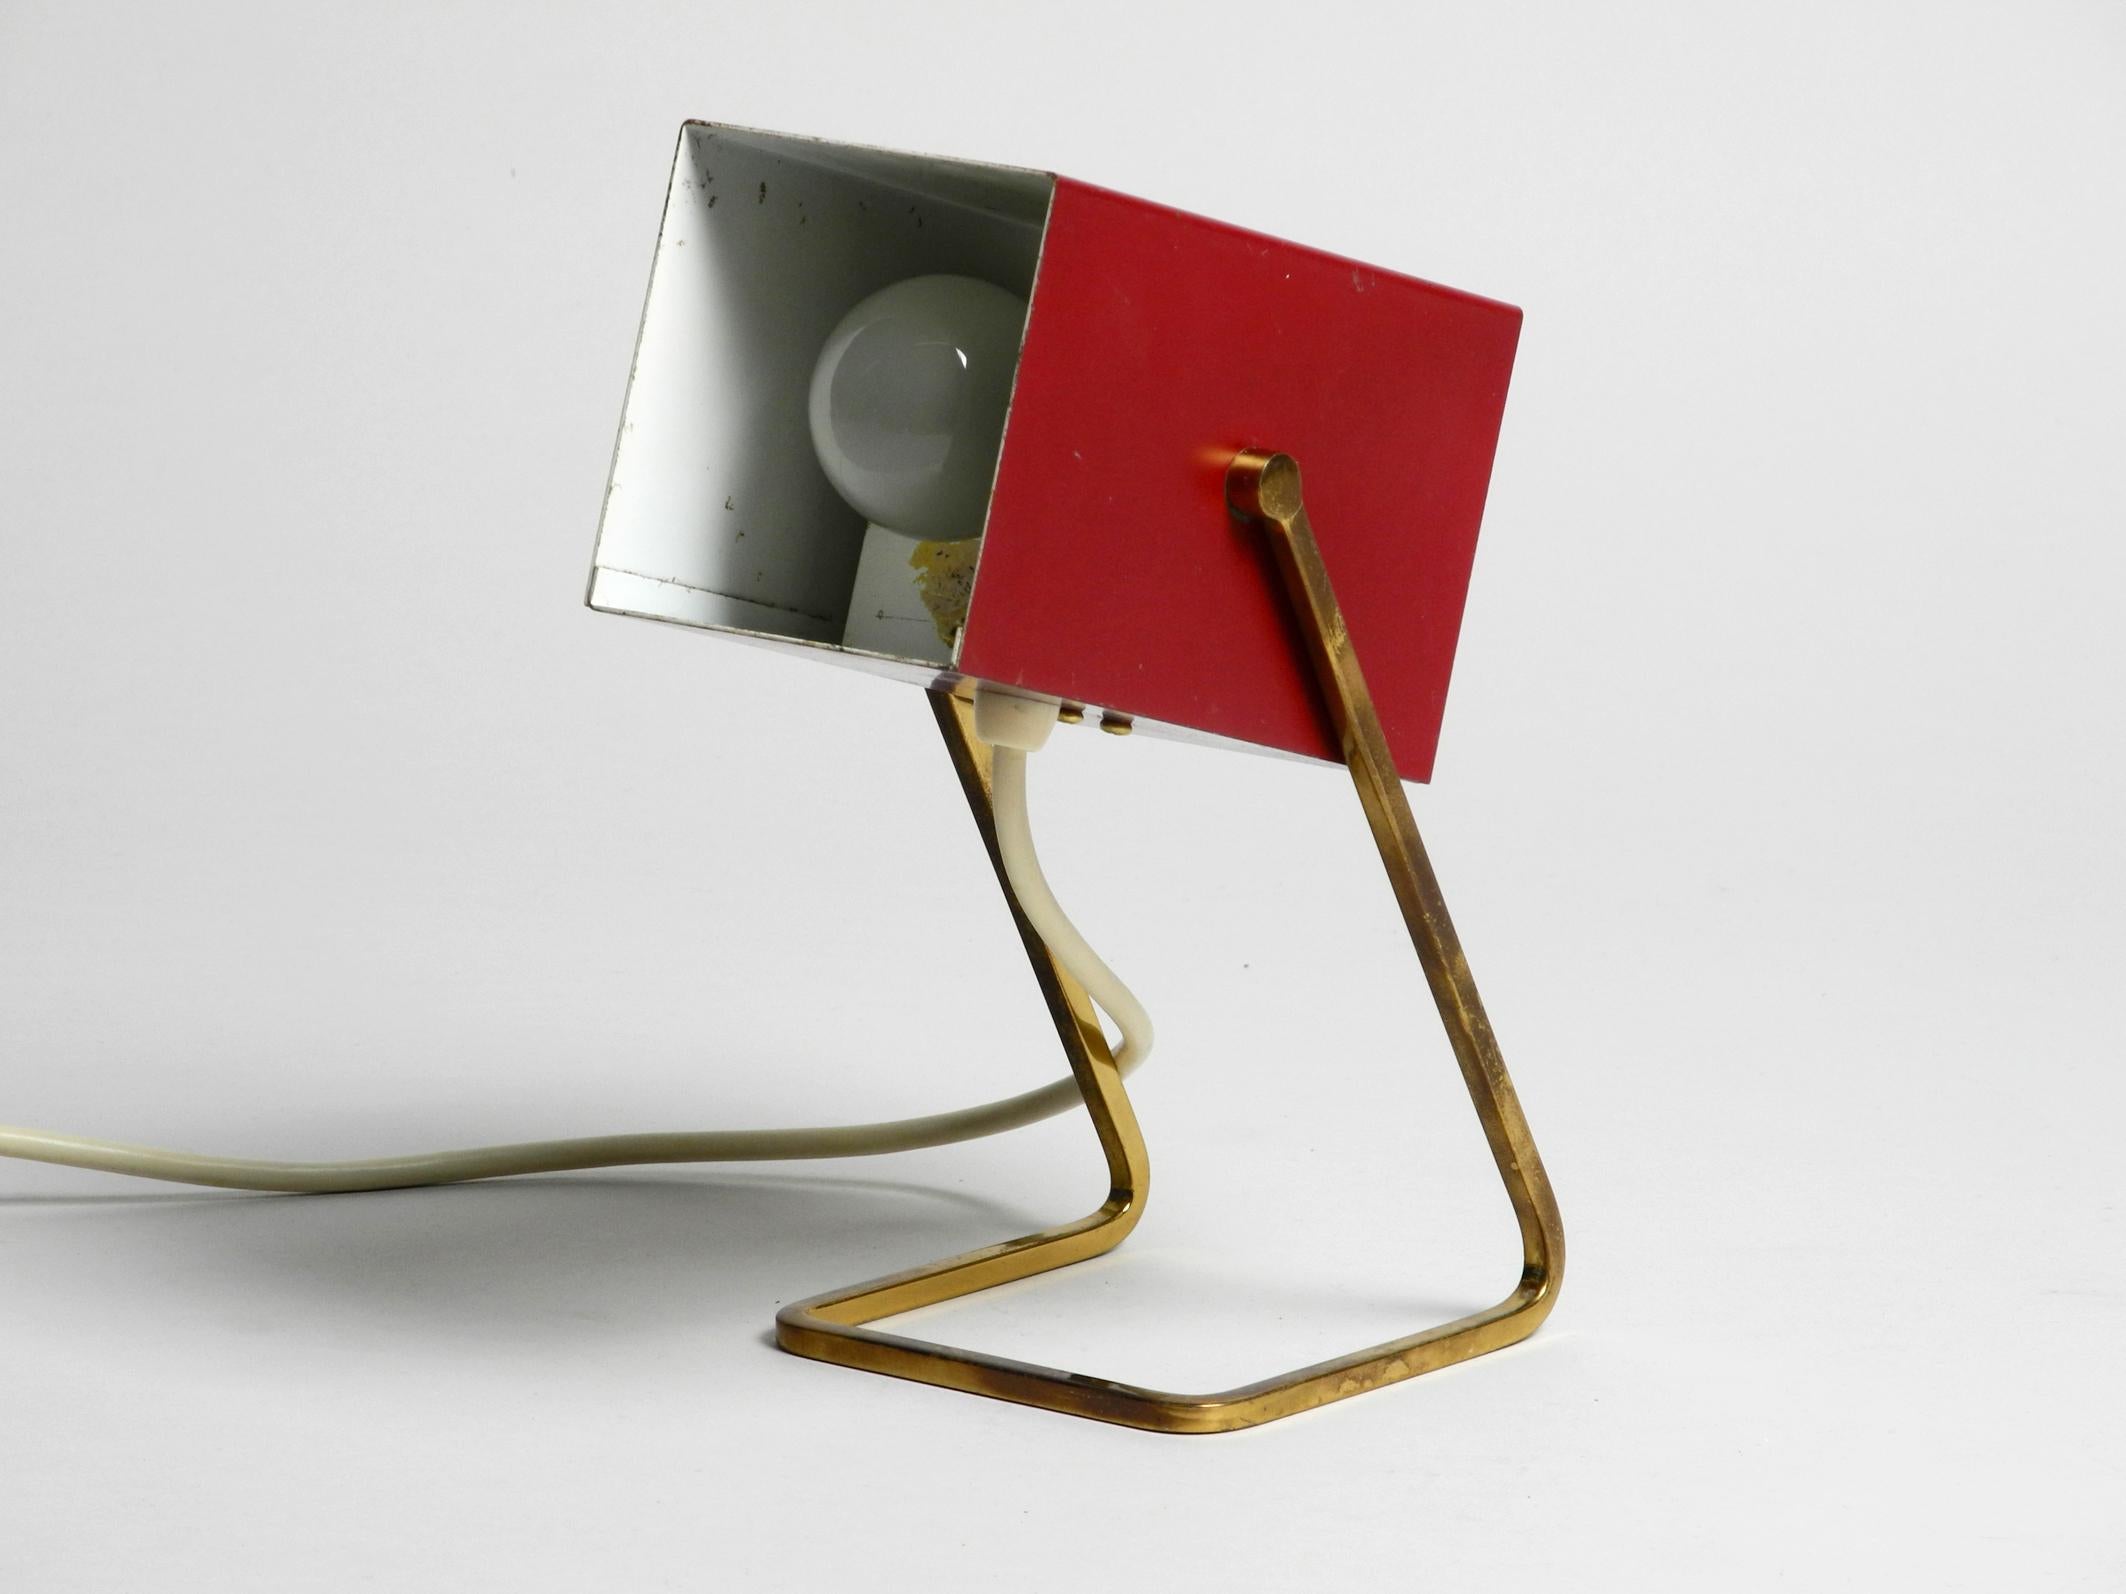 Stunning Kaiser Mid-Century Modern metal bedside lamp.
Painted red outside and white inside. Very rare to find with angular shade,
which is steplessly movable.
Very high quality, entirely made of metal.
Good vintage condition without damages to